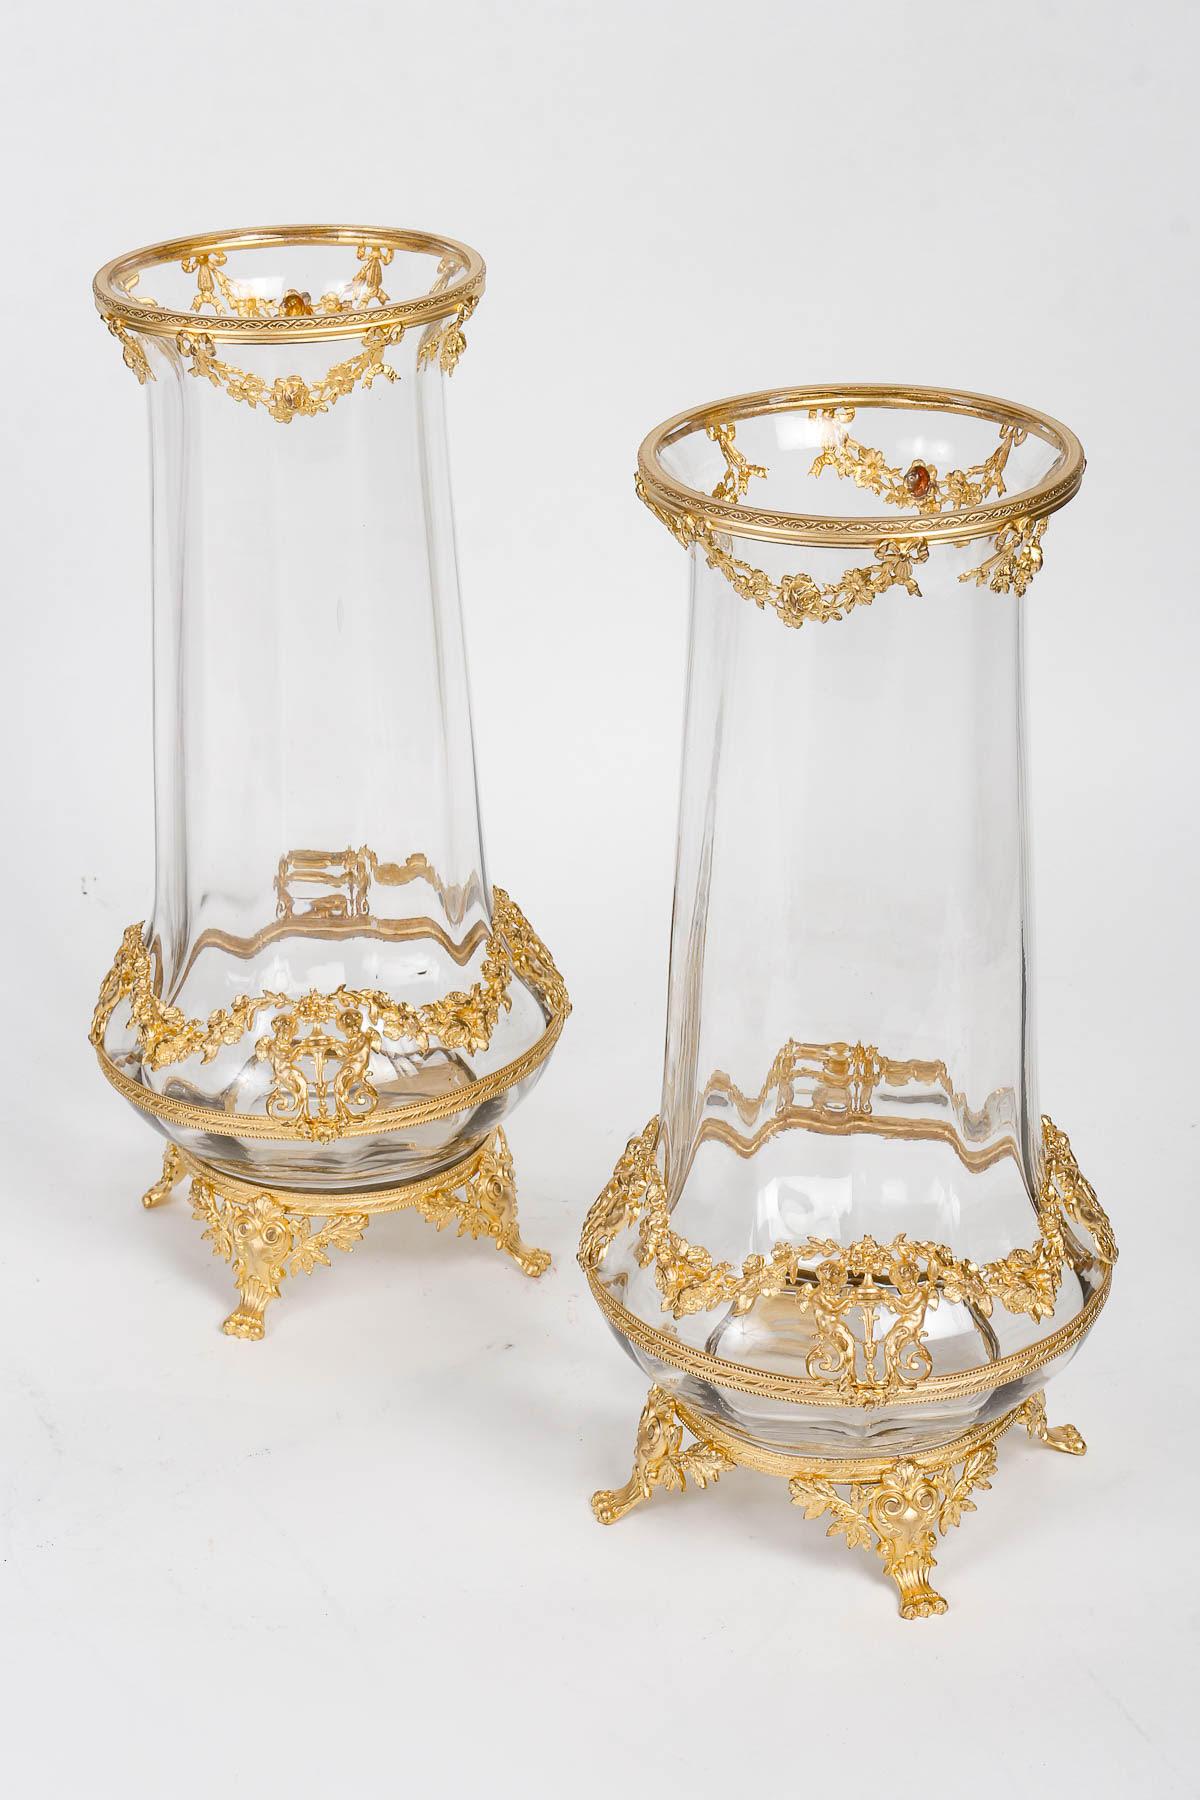 Gilt Baccarat Crystal Decoration, Chased and Gilded Bronze Mounting, 19th Century. 